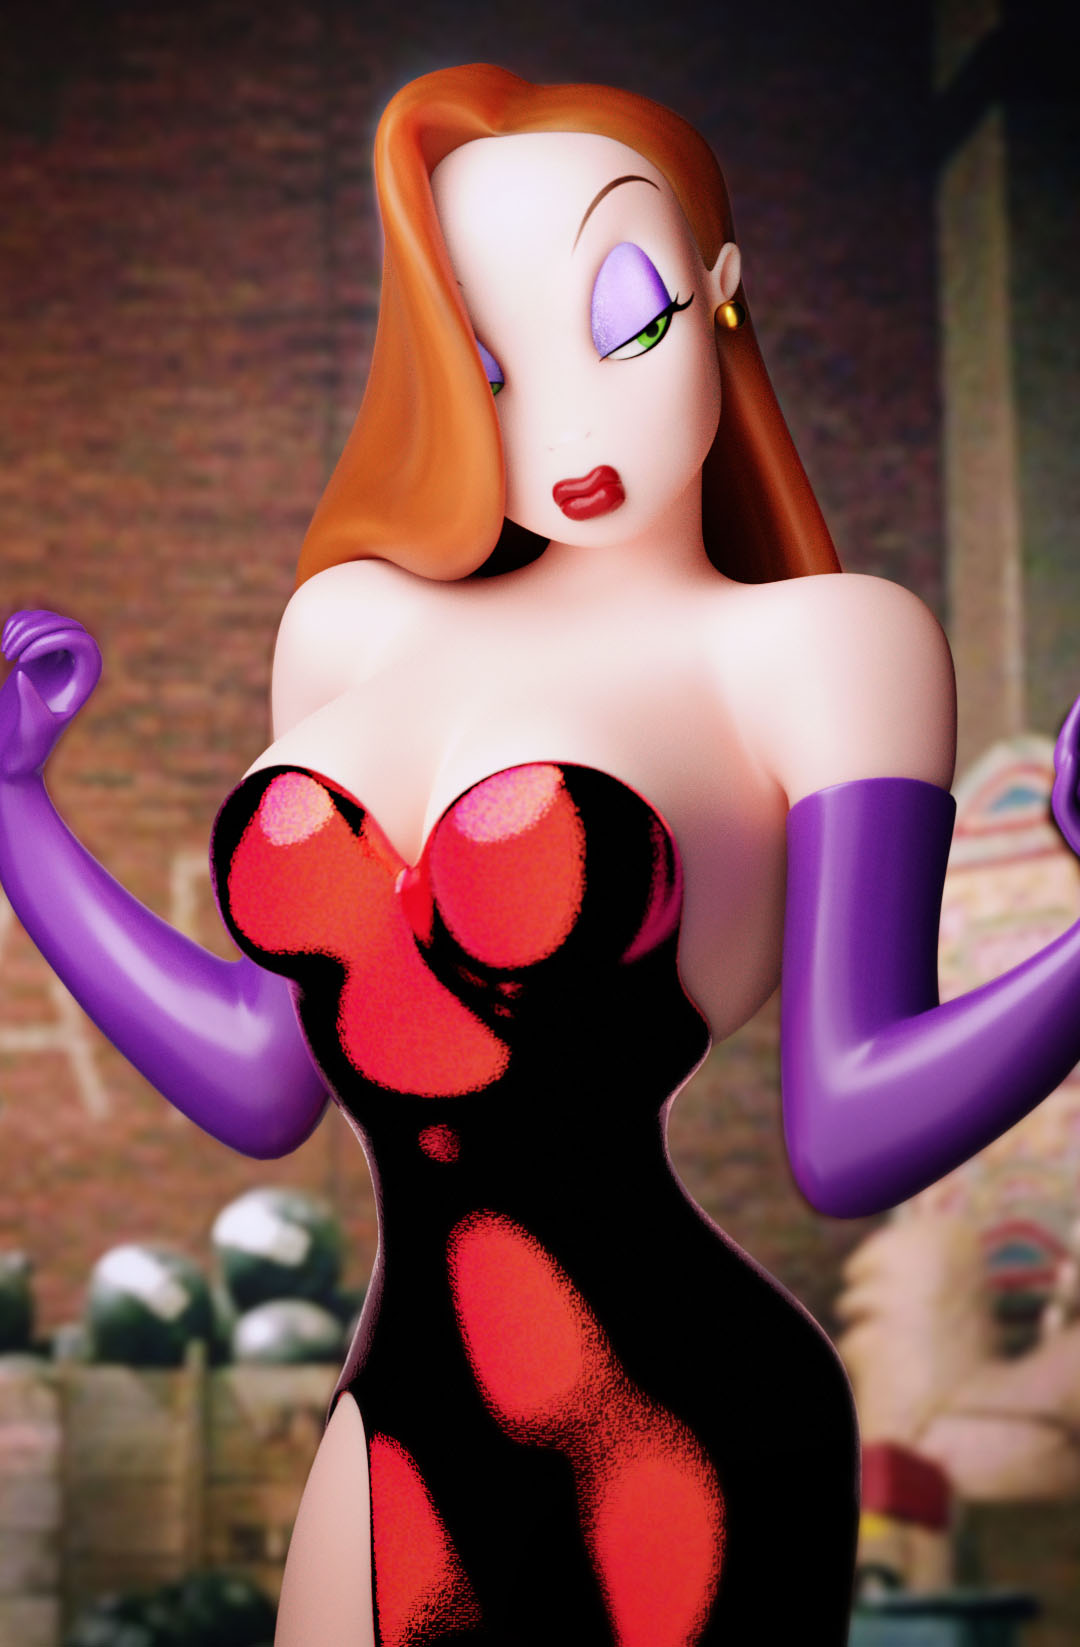 Jessica Rabbit - Finished Projects - Blender Artists Community.